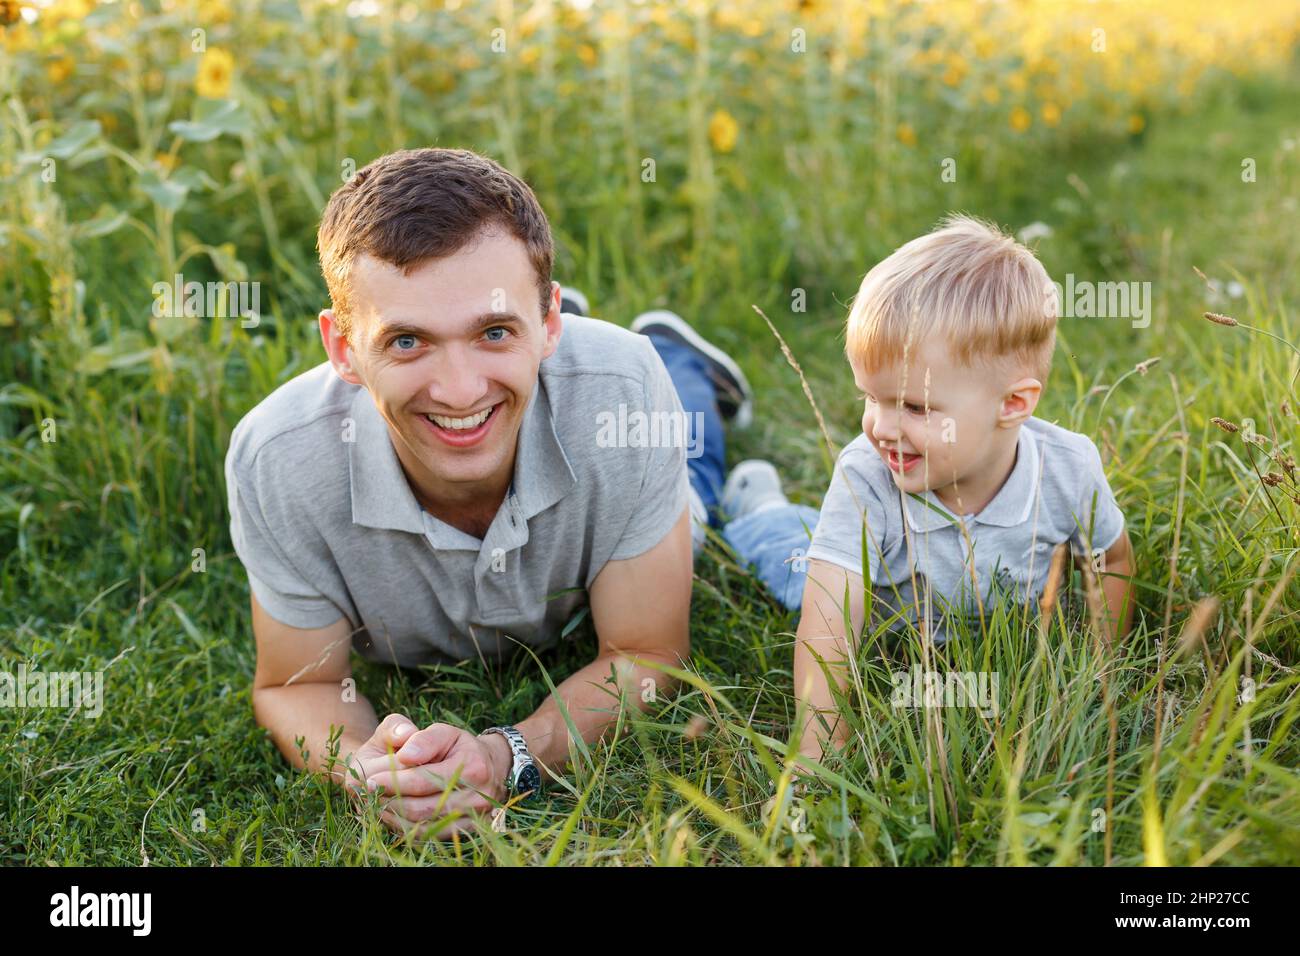 Father and son having fun on the grass. Little boy and his dad lying and laughing. Summer outdoors lifestyle, family leisure, parenthood Stock Photo